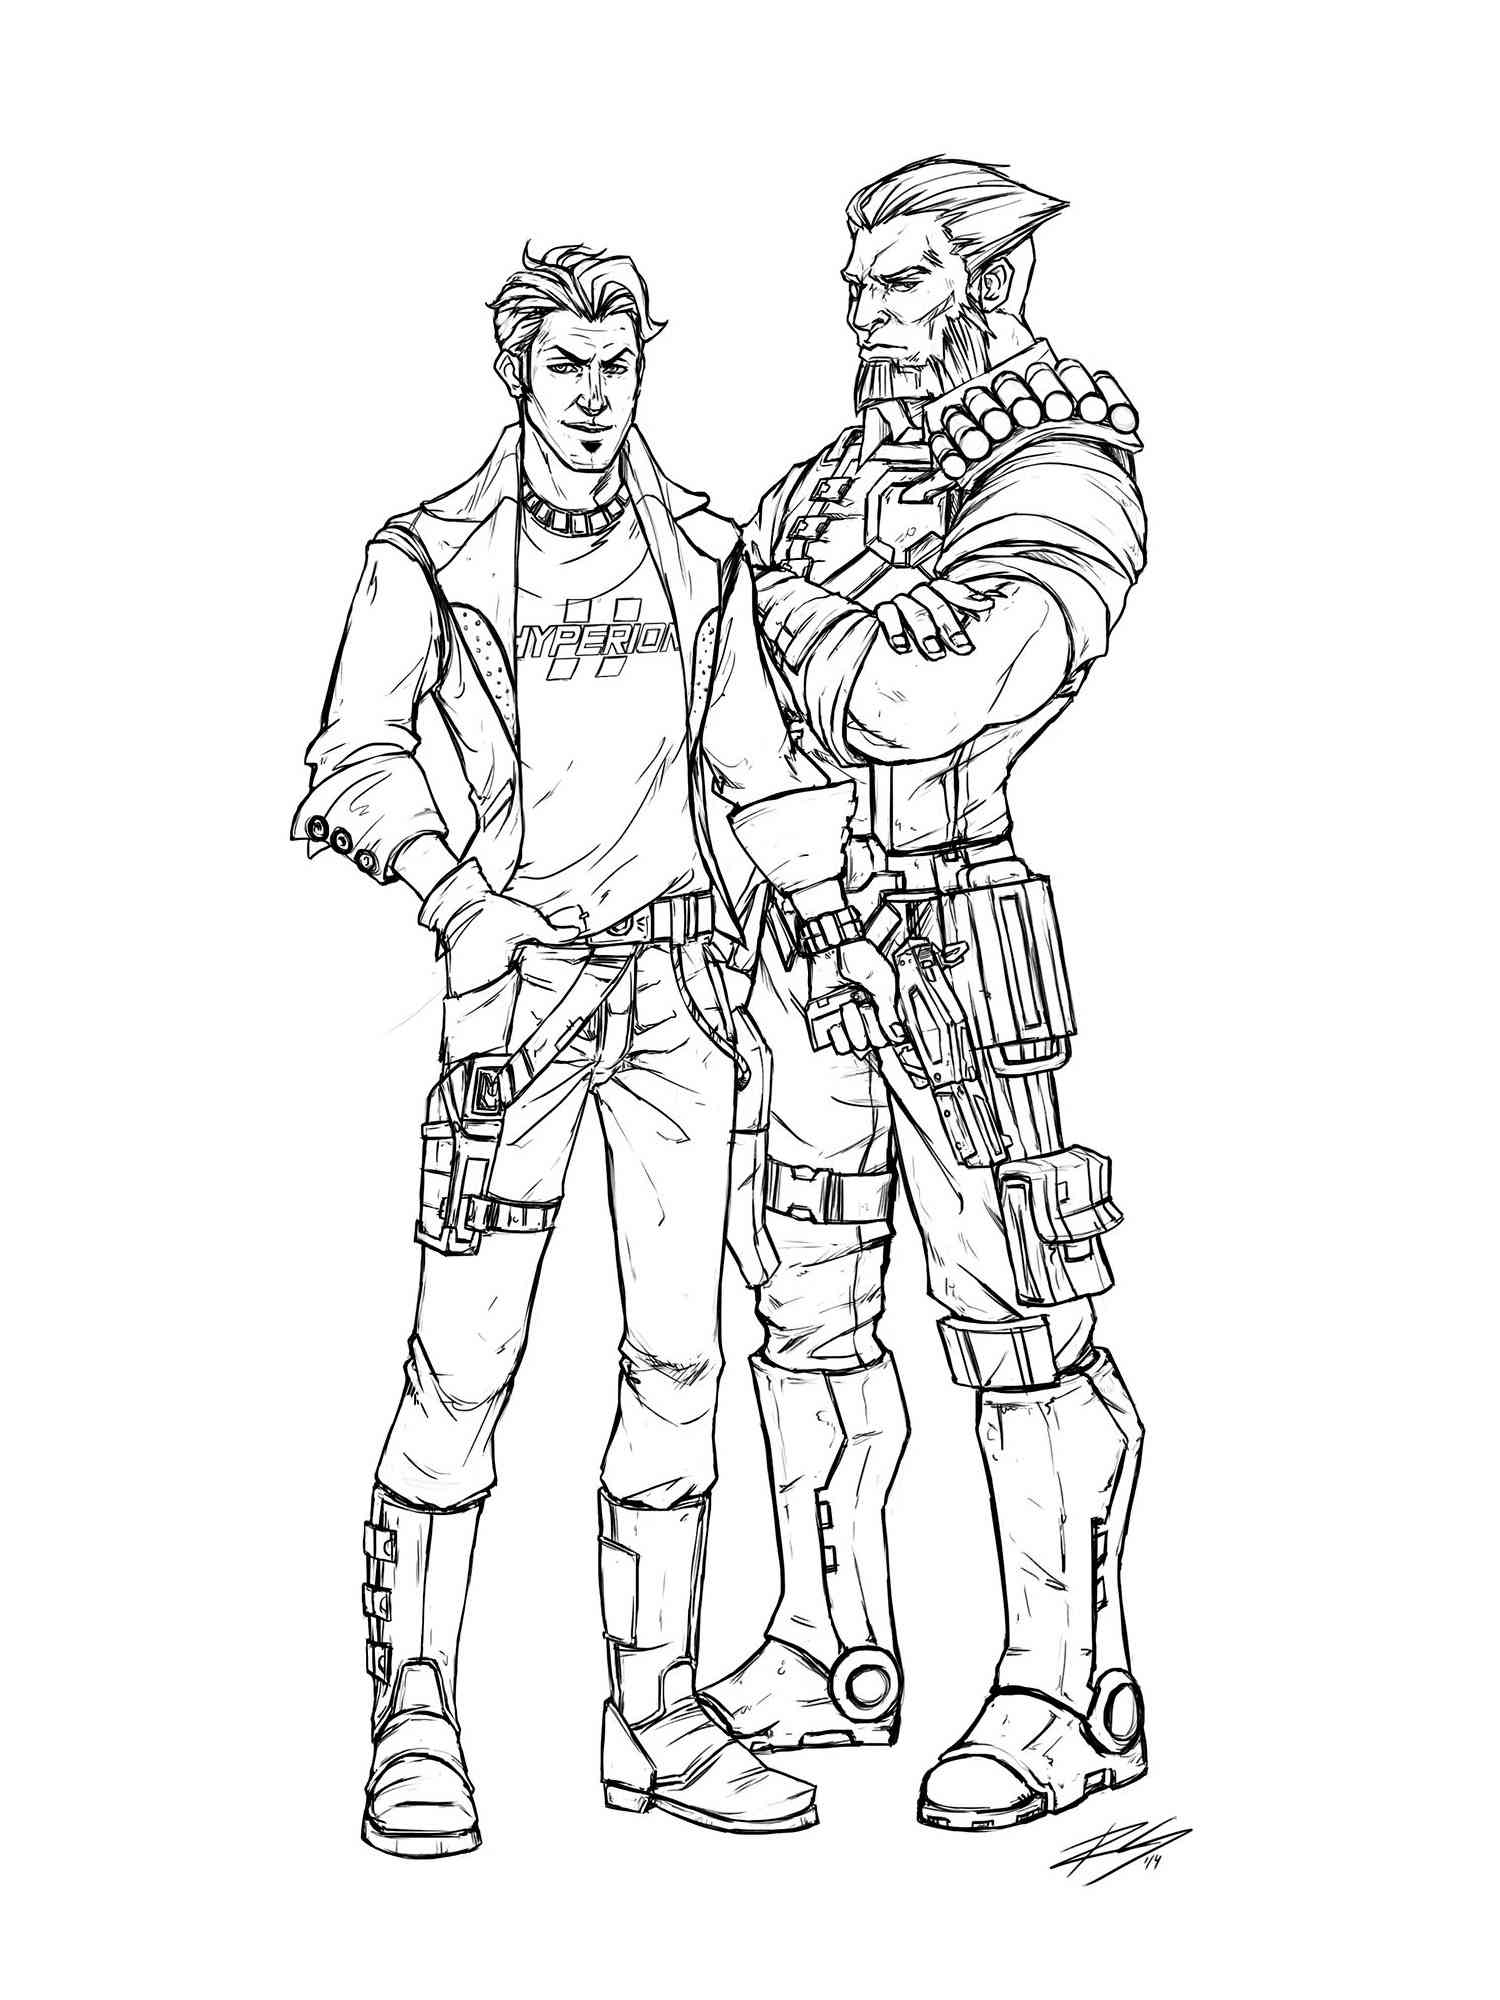 Game Borderlands coloring page